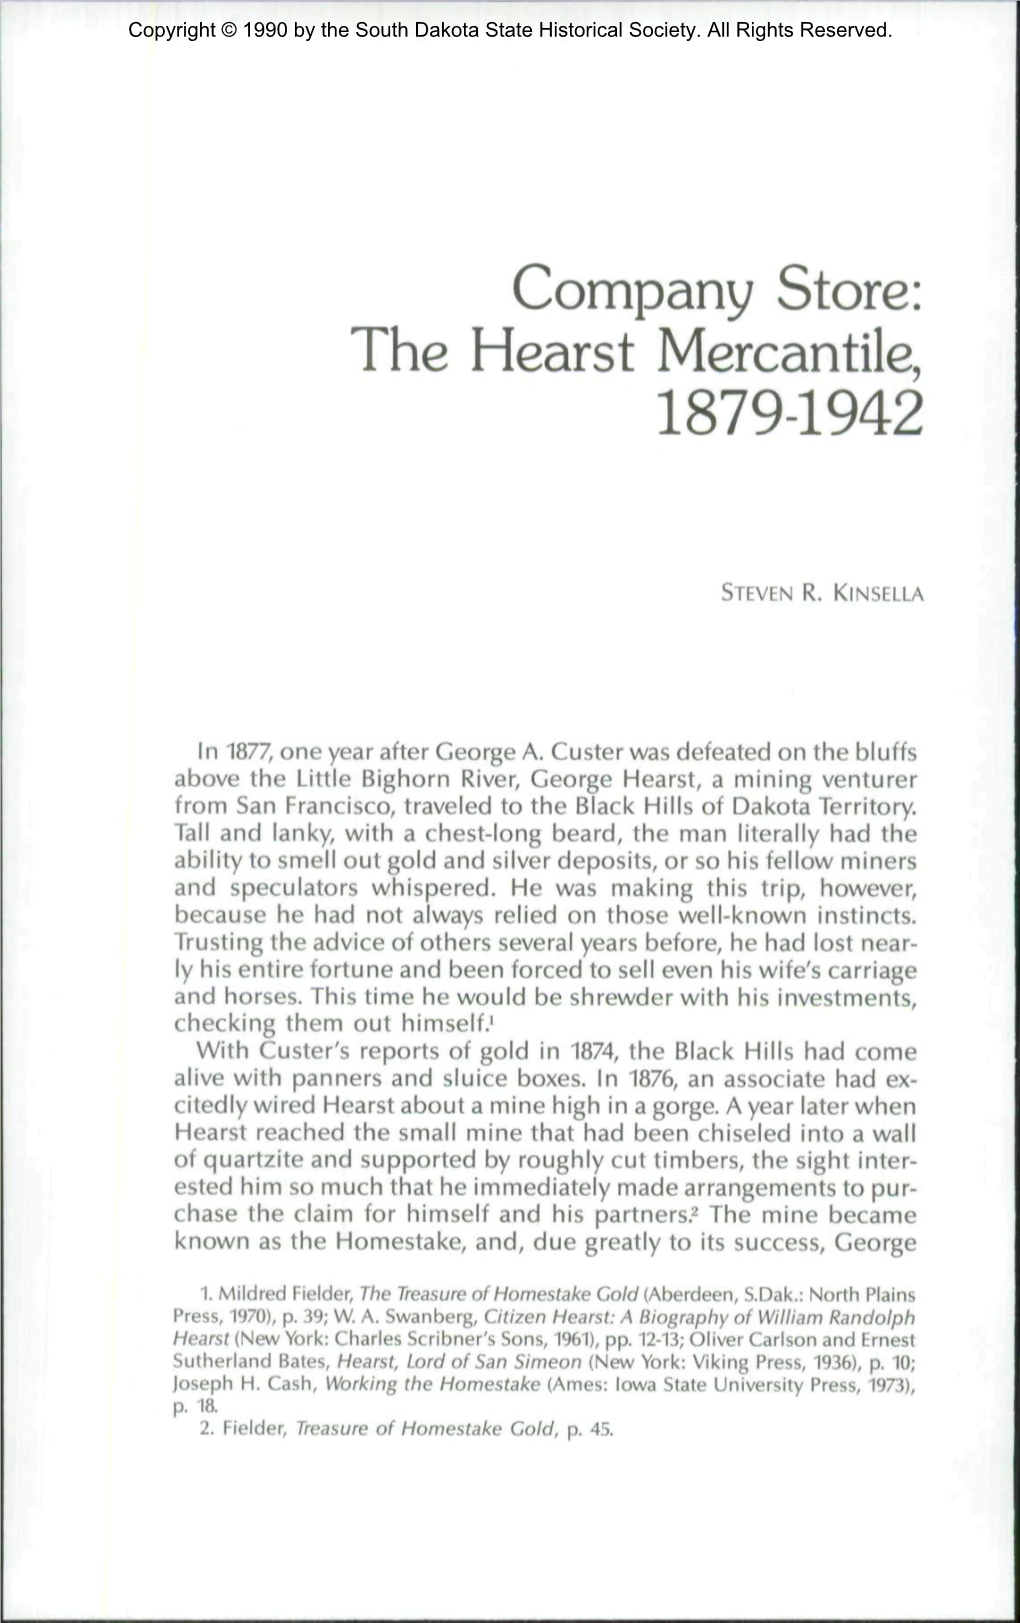 Company Store: the Hearst Mercantile, 1879-1942